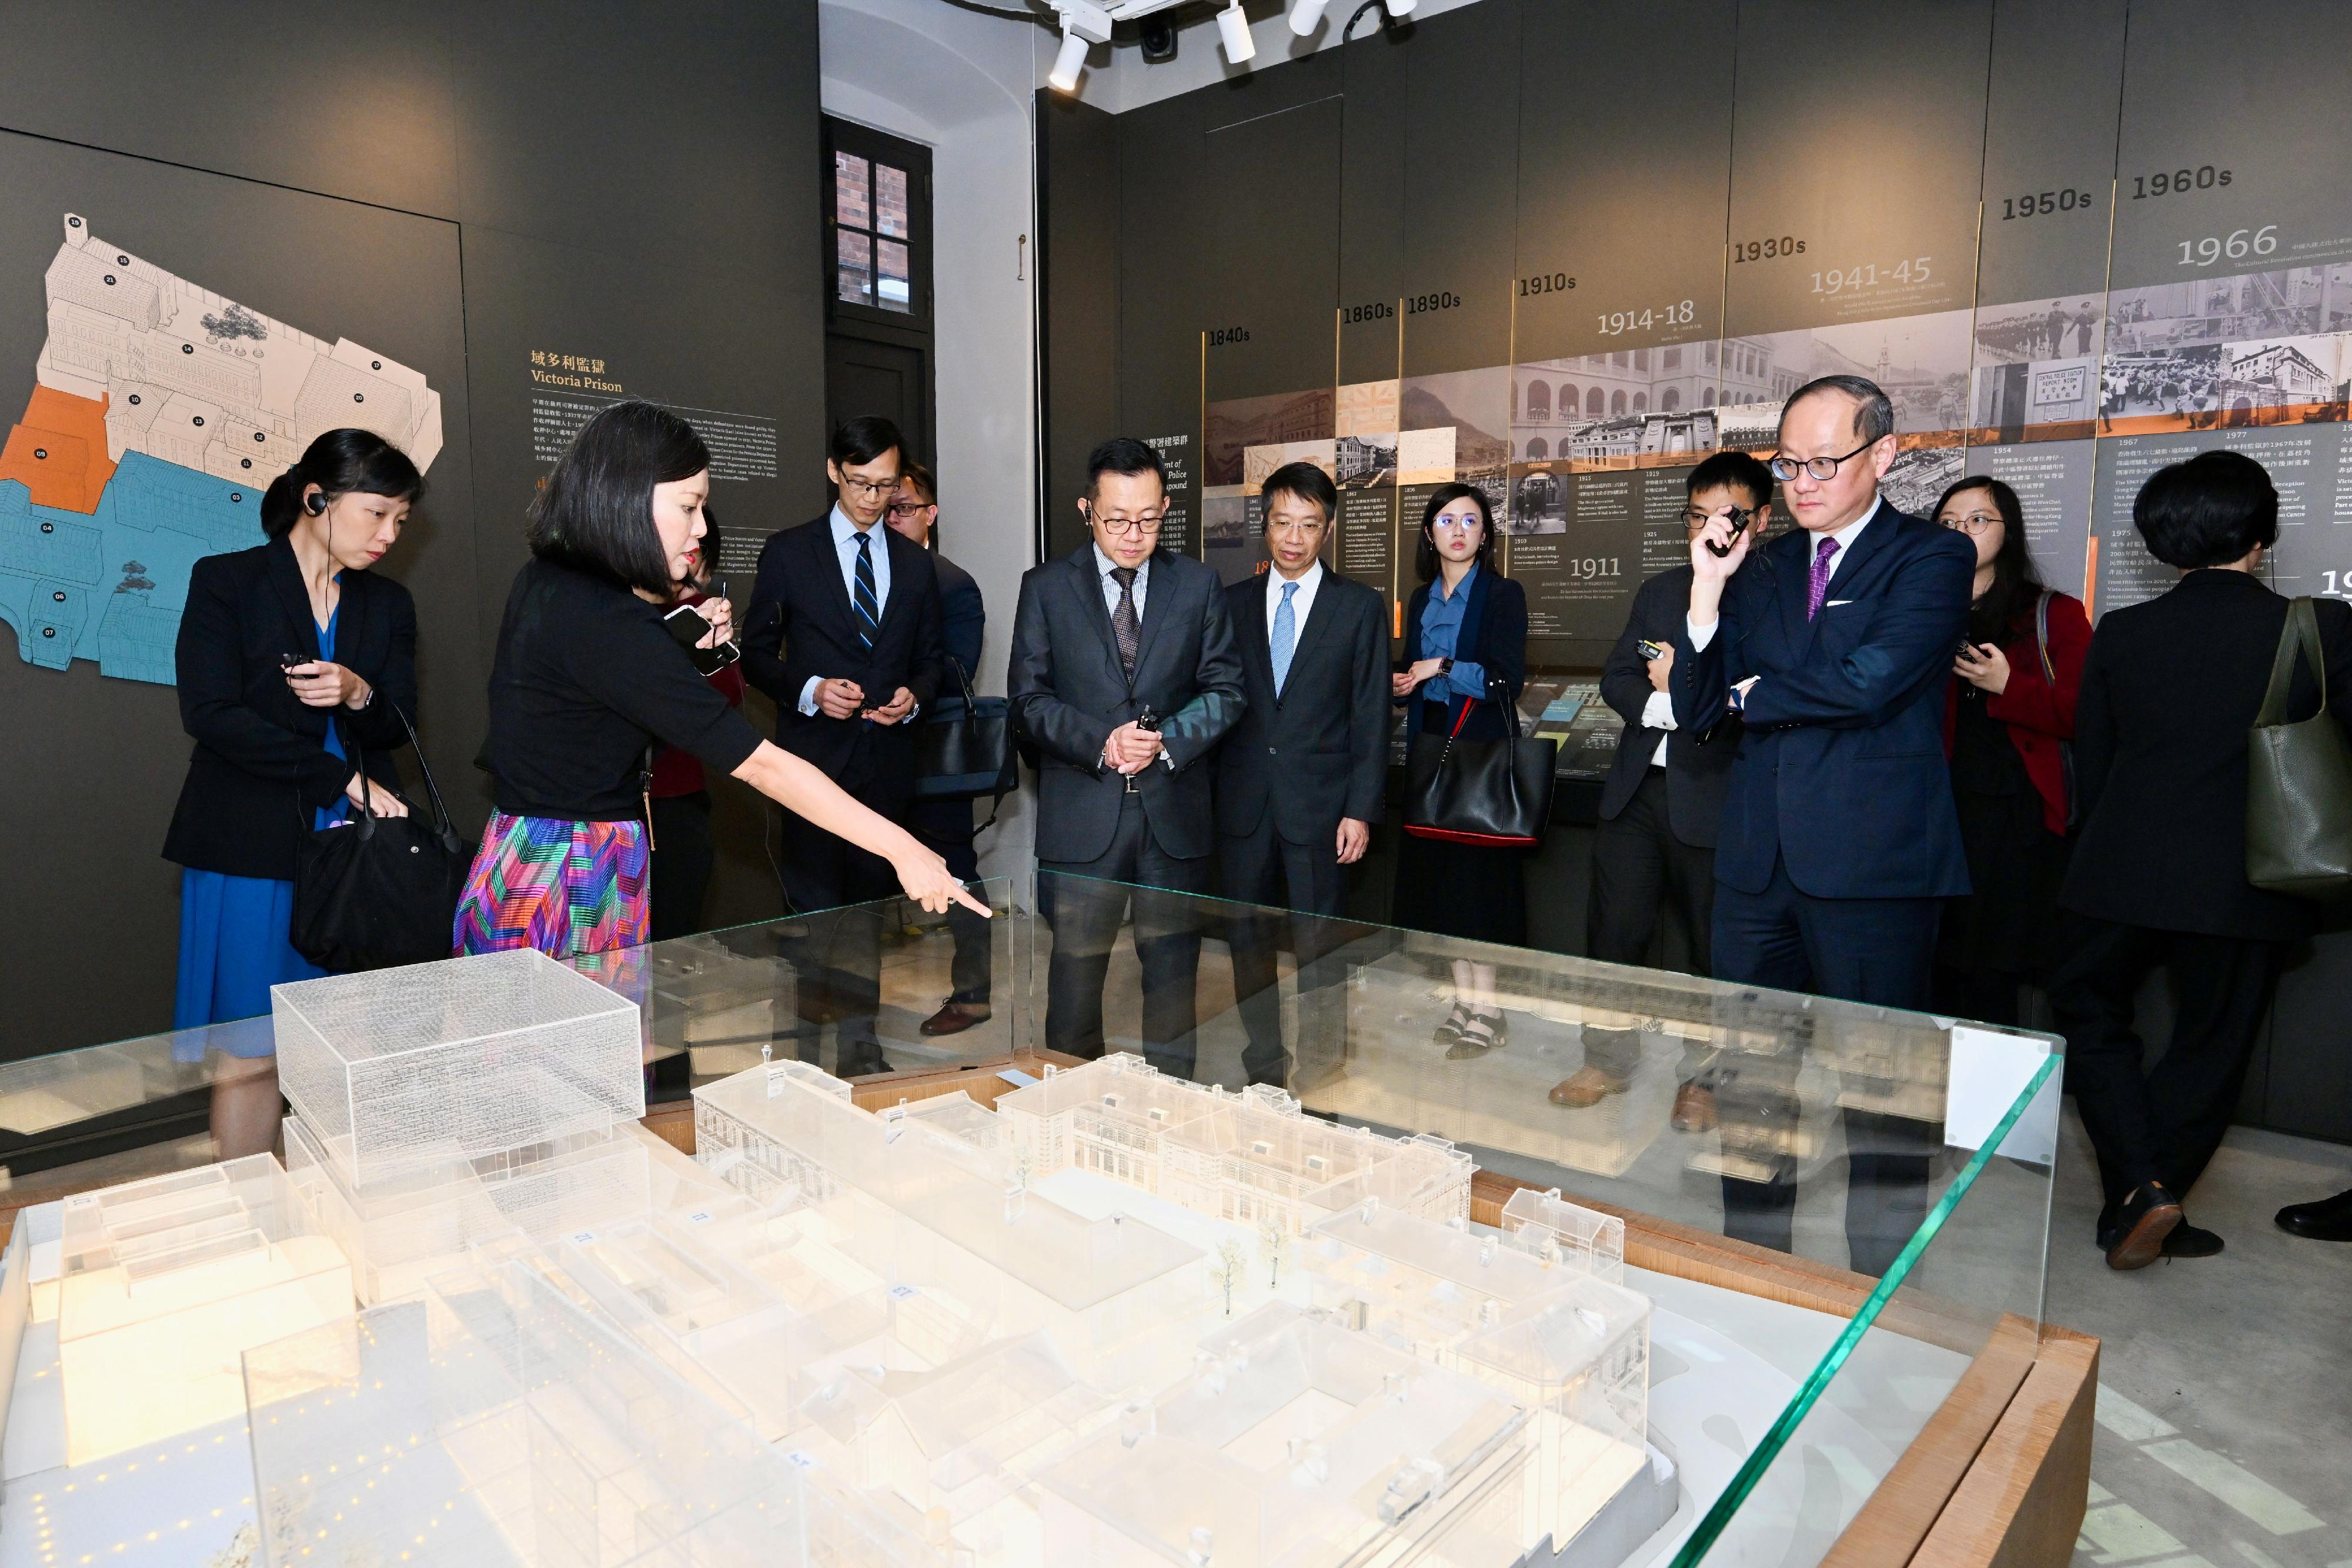 The 7th Singapore-Hong Kong Permanent Secretaries Exchange Programme was held in Hong Kong for two consecutive days starting yesterday (November 23). The delegation led by the Head of Civil Service of Singapore, Mr Leo Yip (fourth left), visited Tai Kwun to learn about the heritage conservation efforts yesterday afternoon. Photo shows the delegation receiving a briefing on the Tai Kwun compound. Looking on is the Permanent Secretary for the Civil Service, Mr Clement Leung (fifth left).